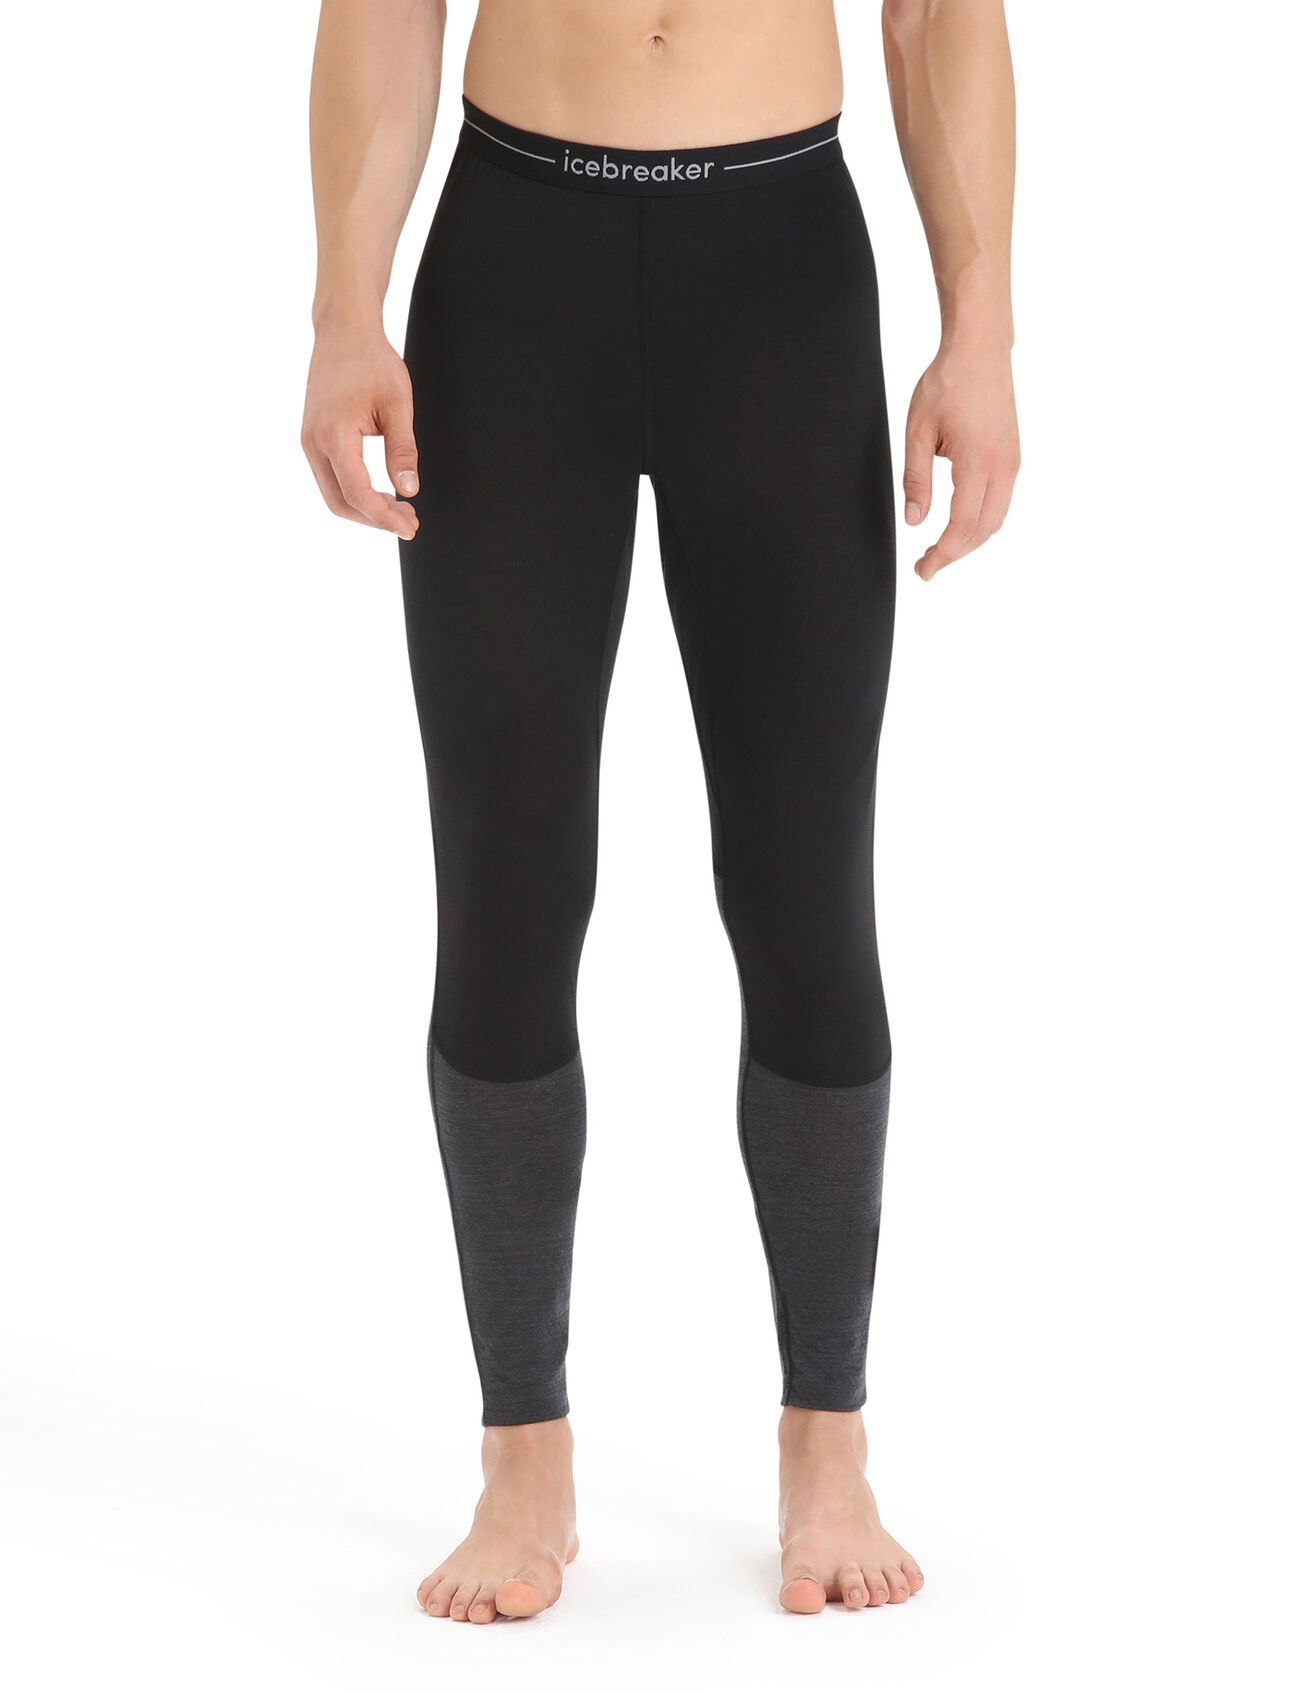 Mens 125 ZoneKnit™ Merino Thermal Leggings Ultralight merino base layer bottoms designed to help regulate body temperature during high-intensity activity, the 125 ZoneKnit™ Leggings feature our jersey Cool-Lite™ fabric for adventure and everyday training.